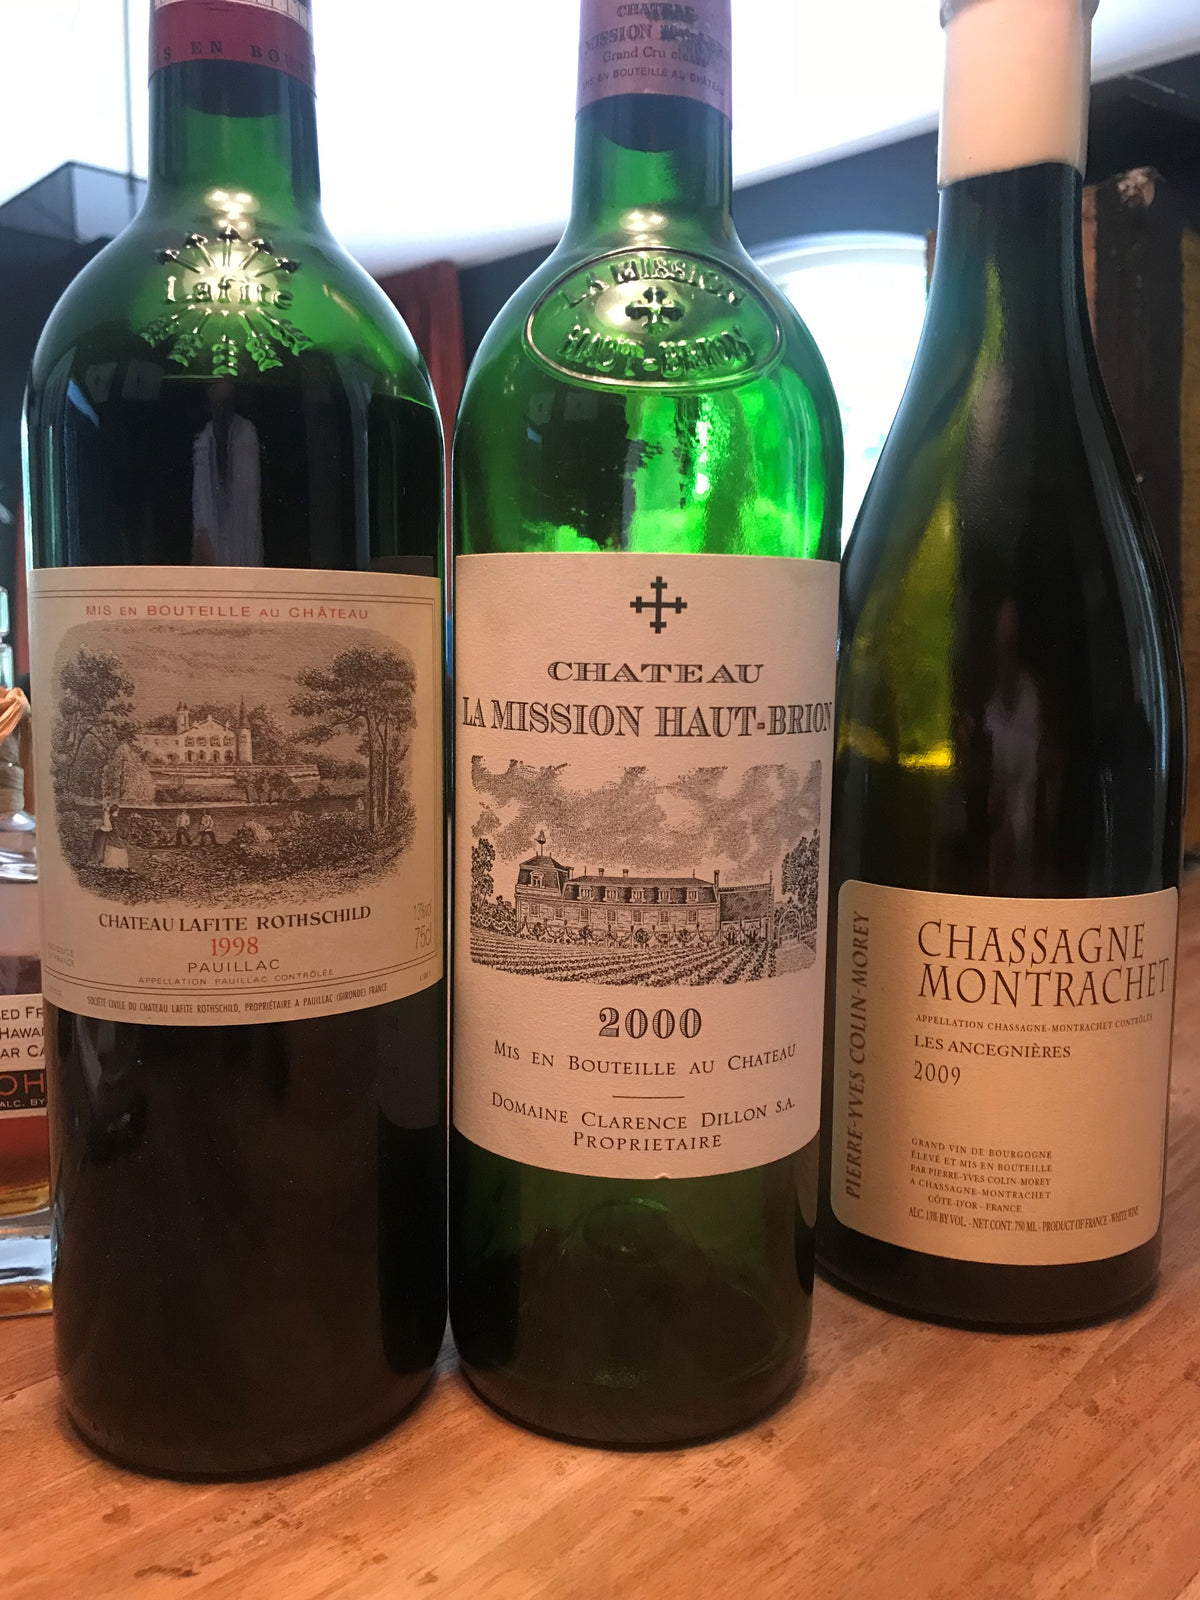 Why not open a Lafite Rothschild 1998 after the stunning La Mission Haut Brion 2000?